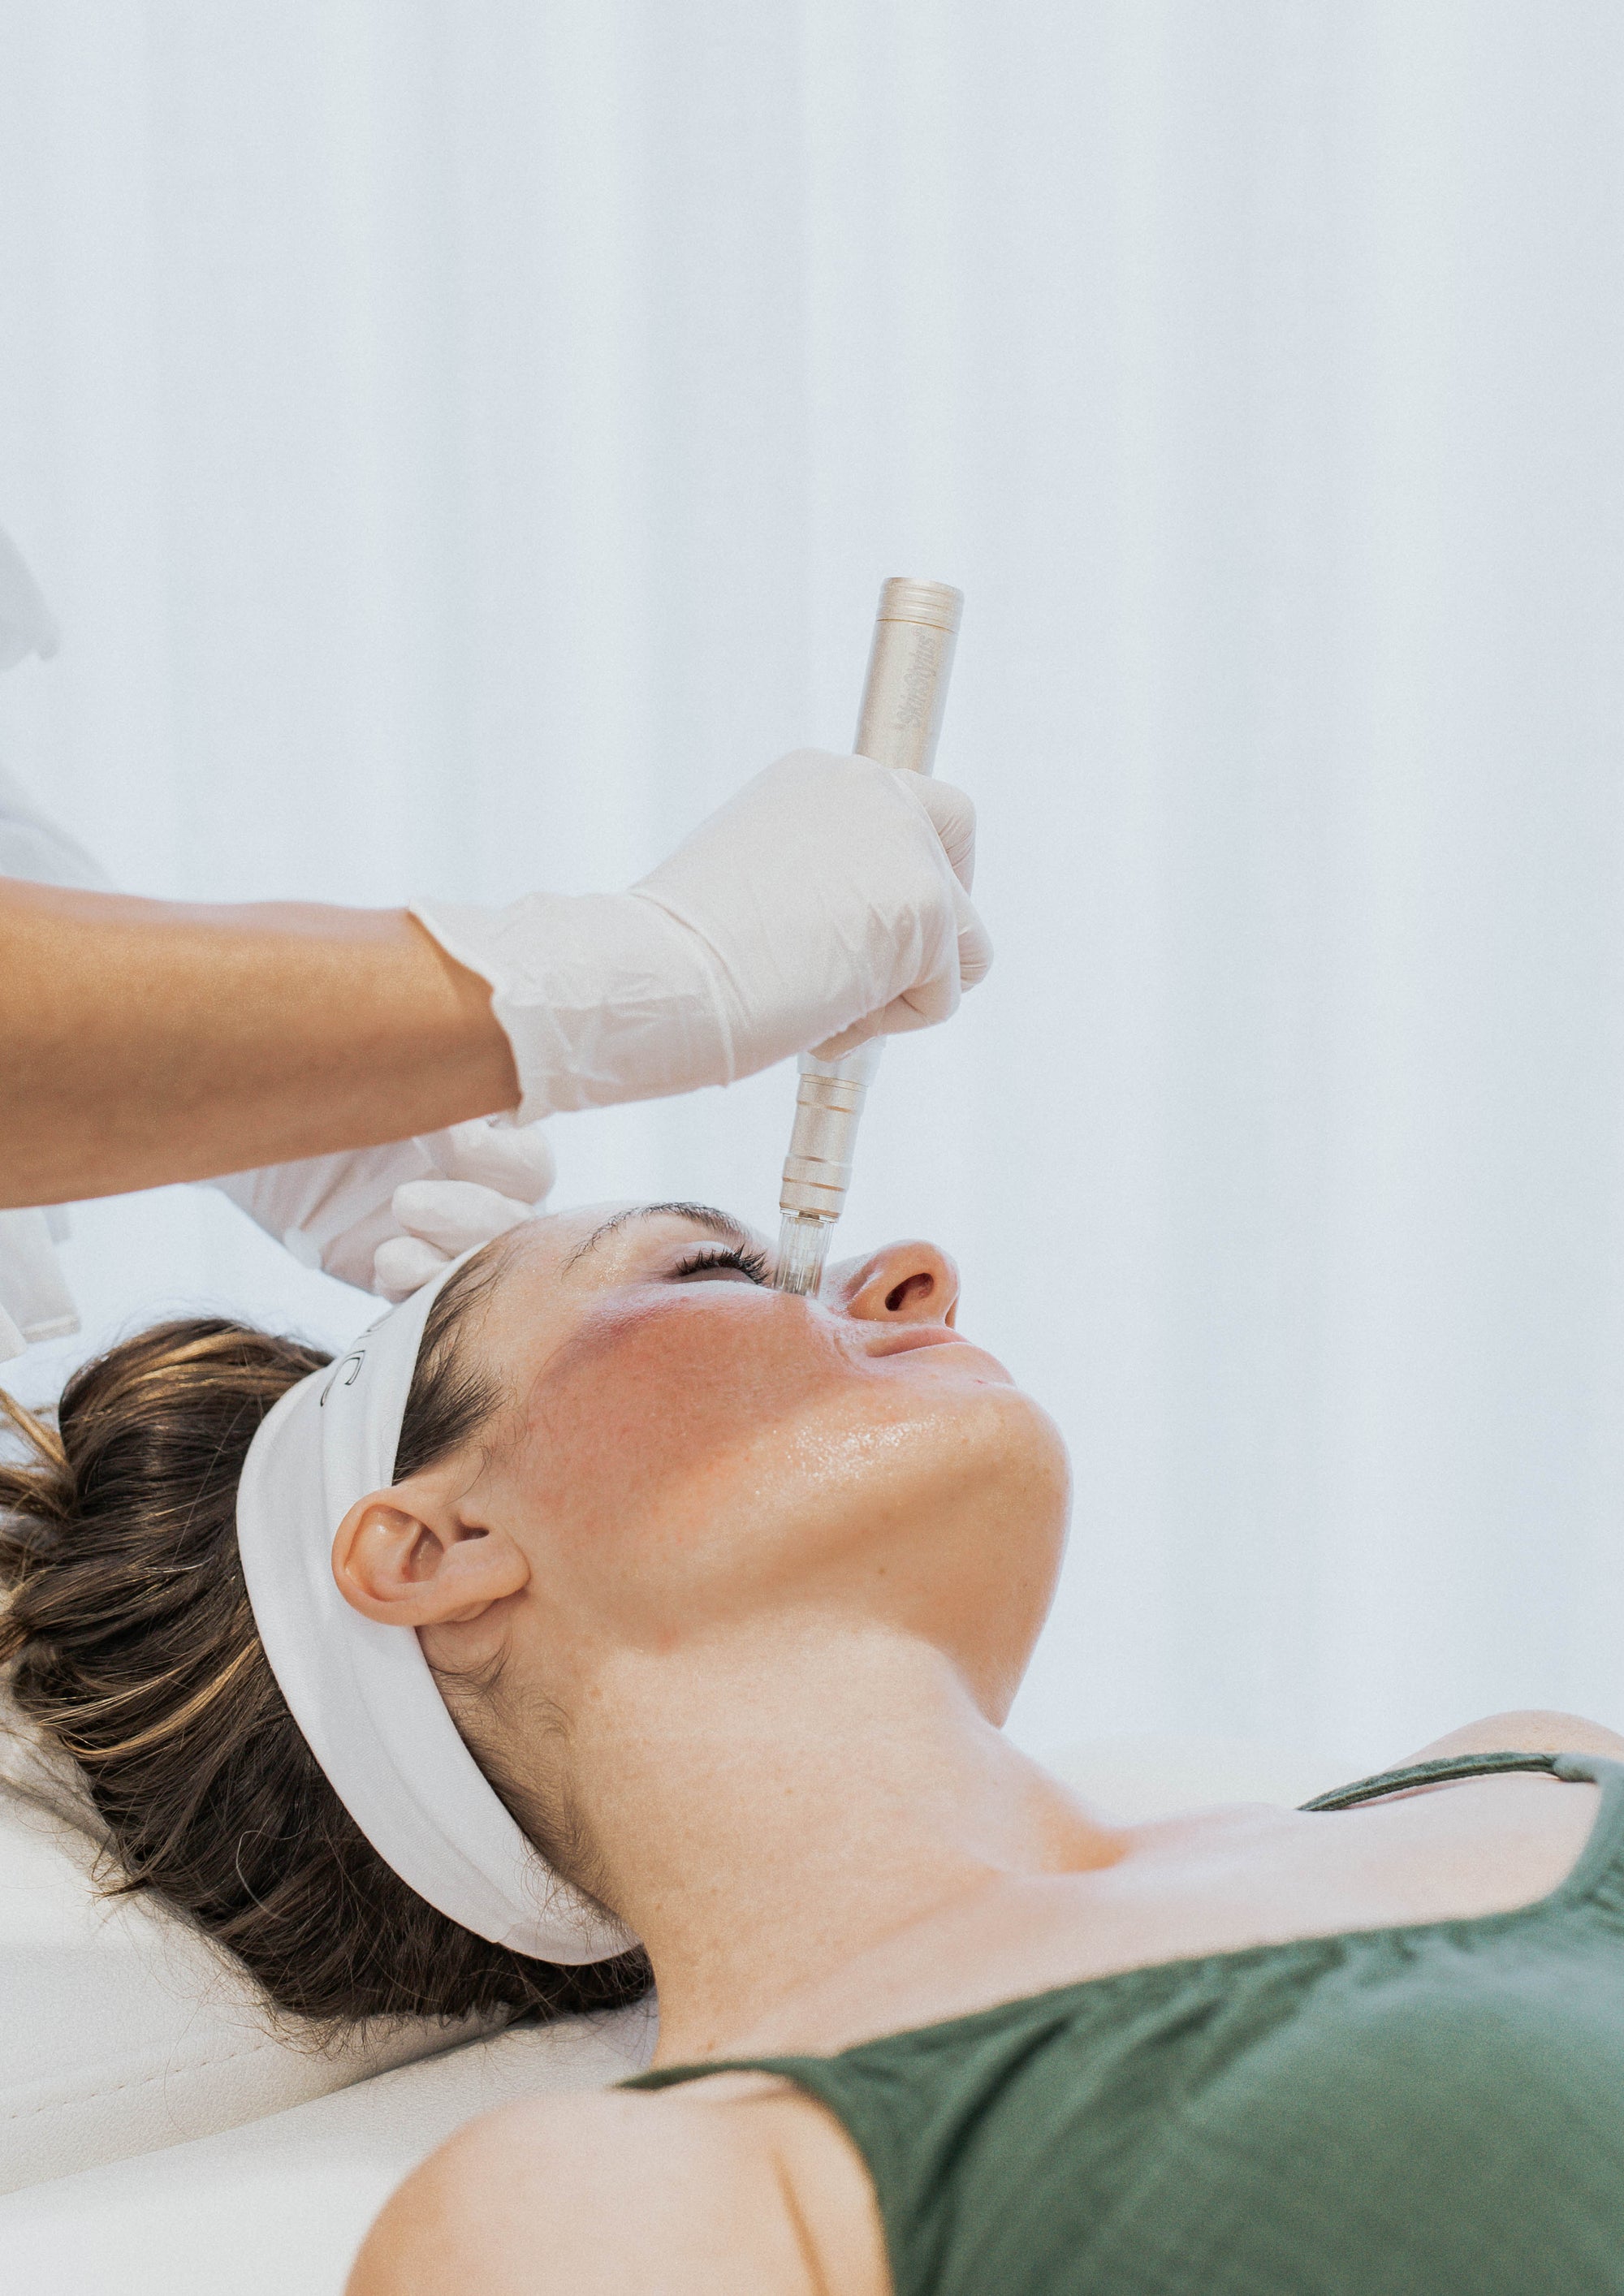 Microneedling for Acne Scars: Does It Really Work?